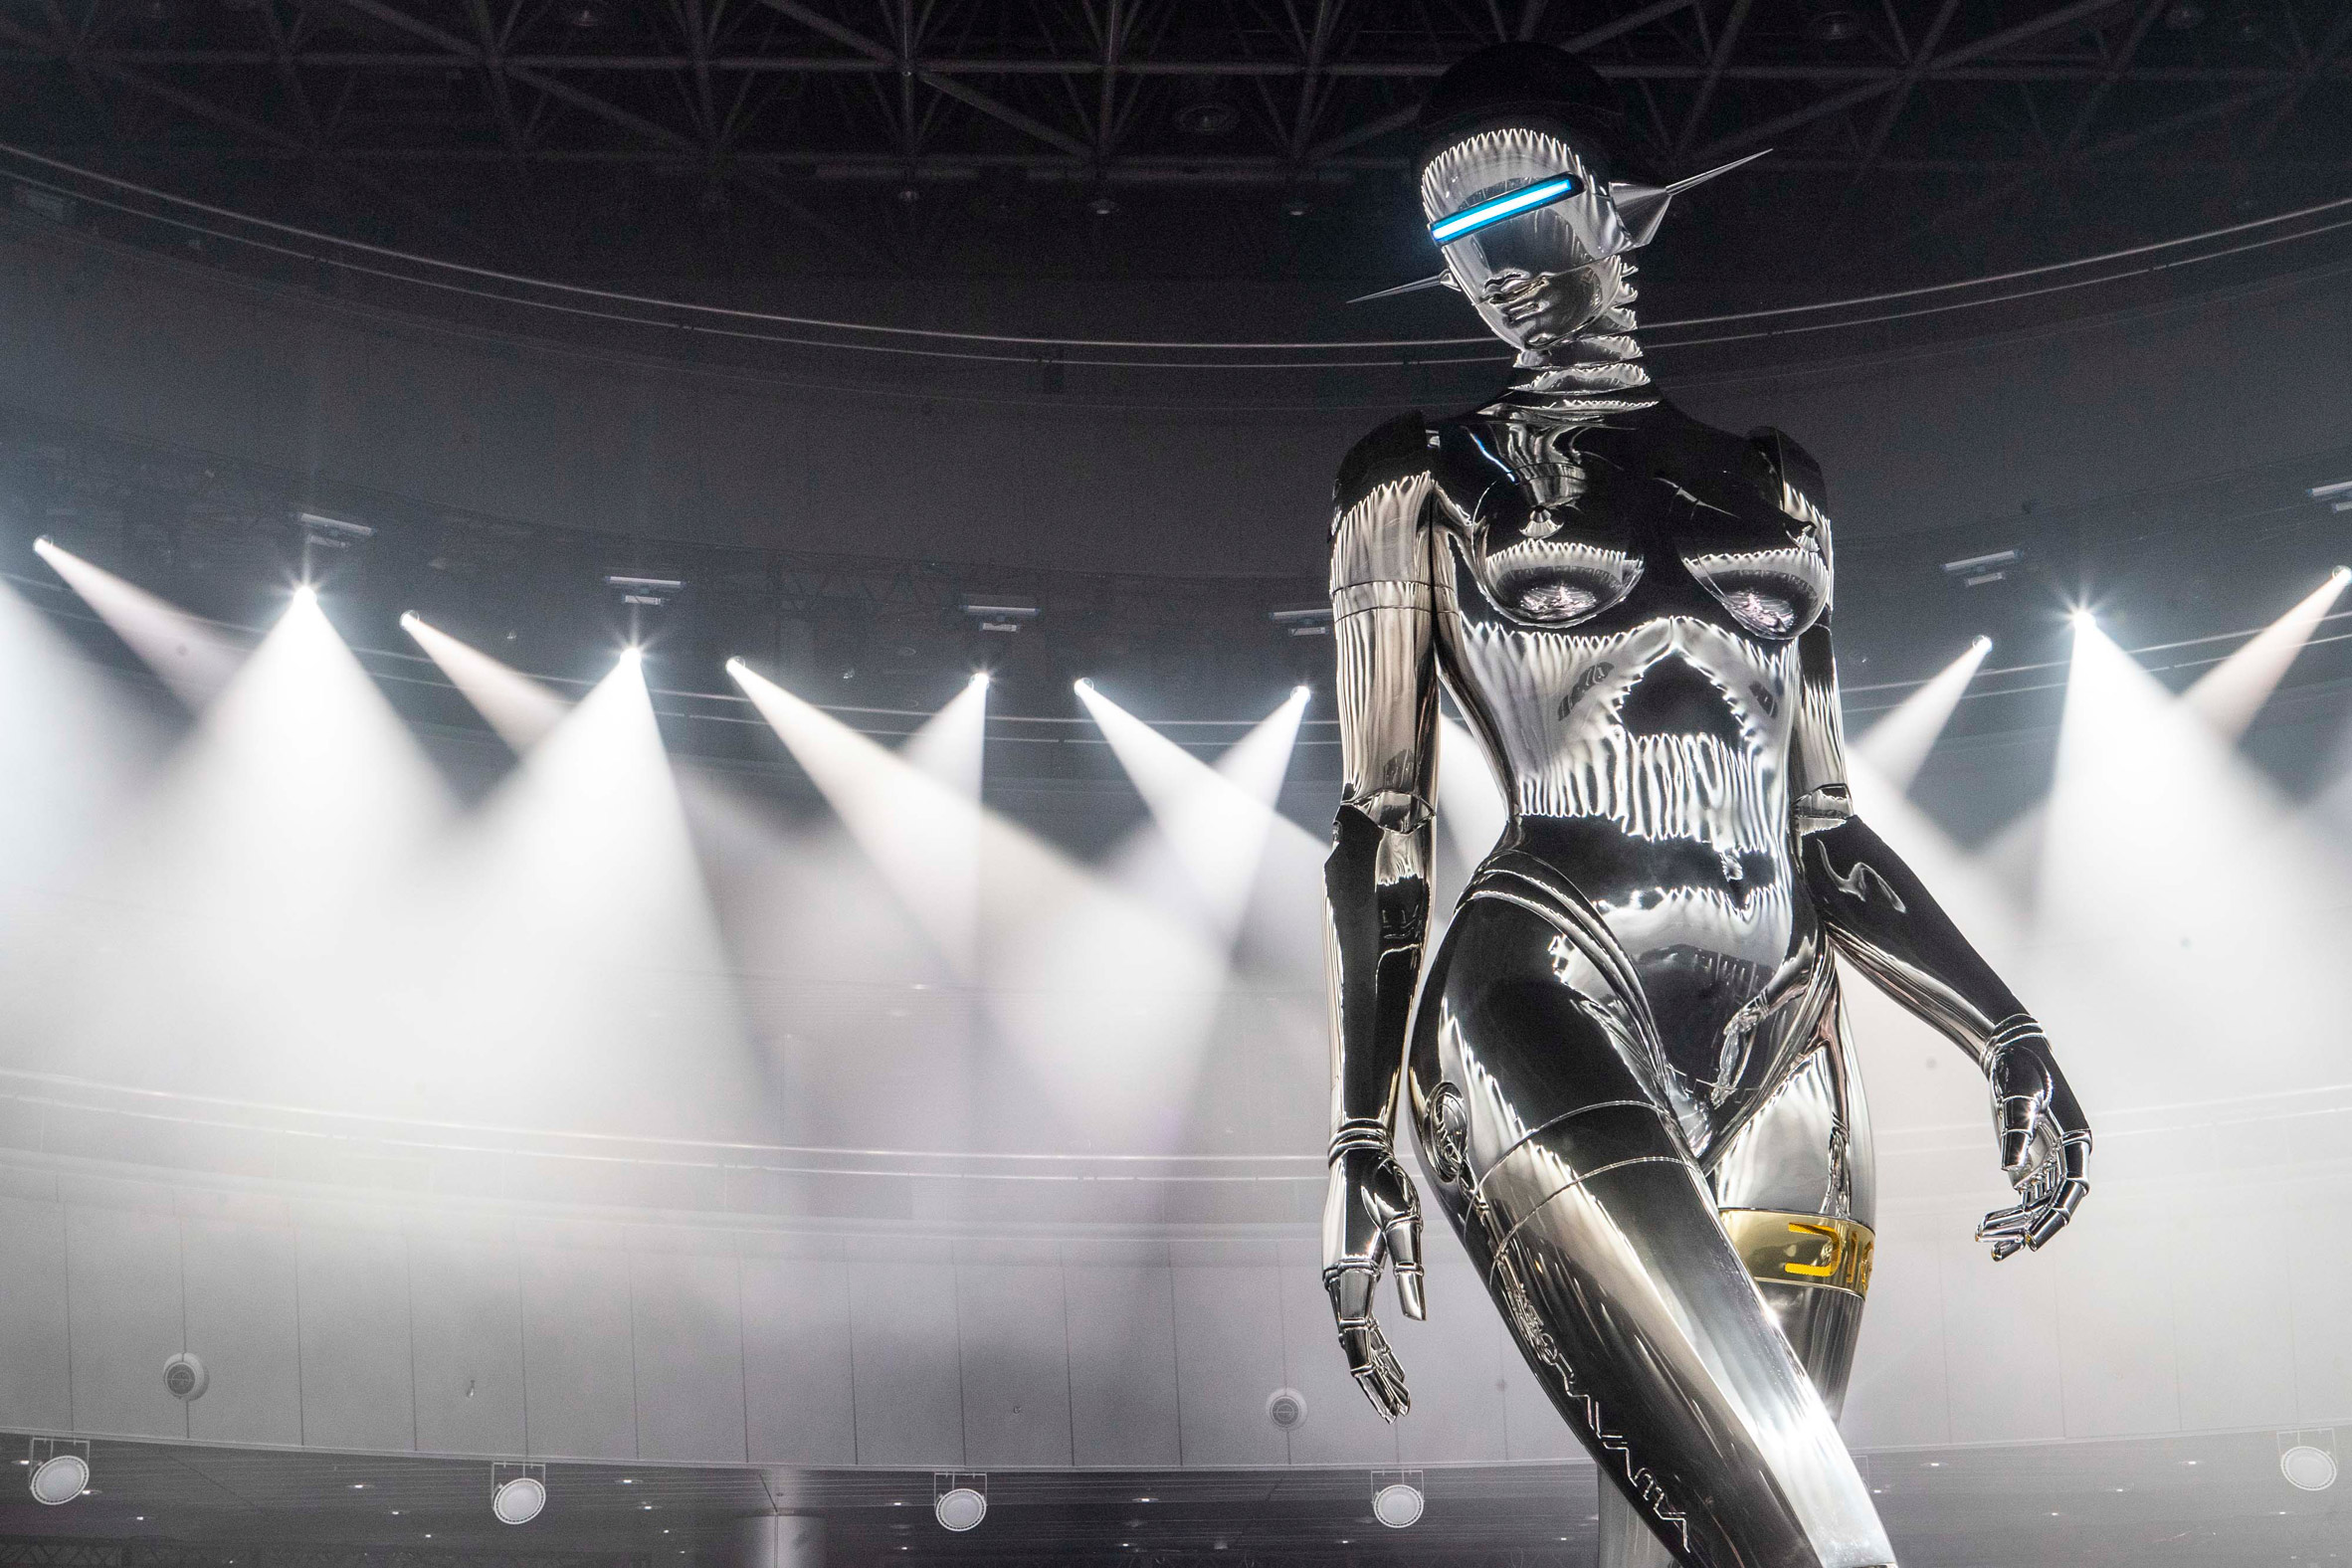 Dior commissioned Hajime Soramaya to build a 12 metre tall sculpture of a robot